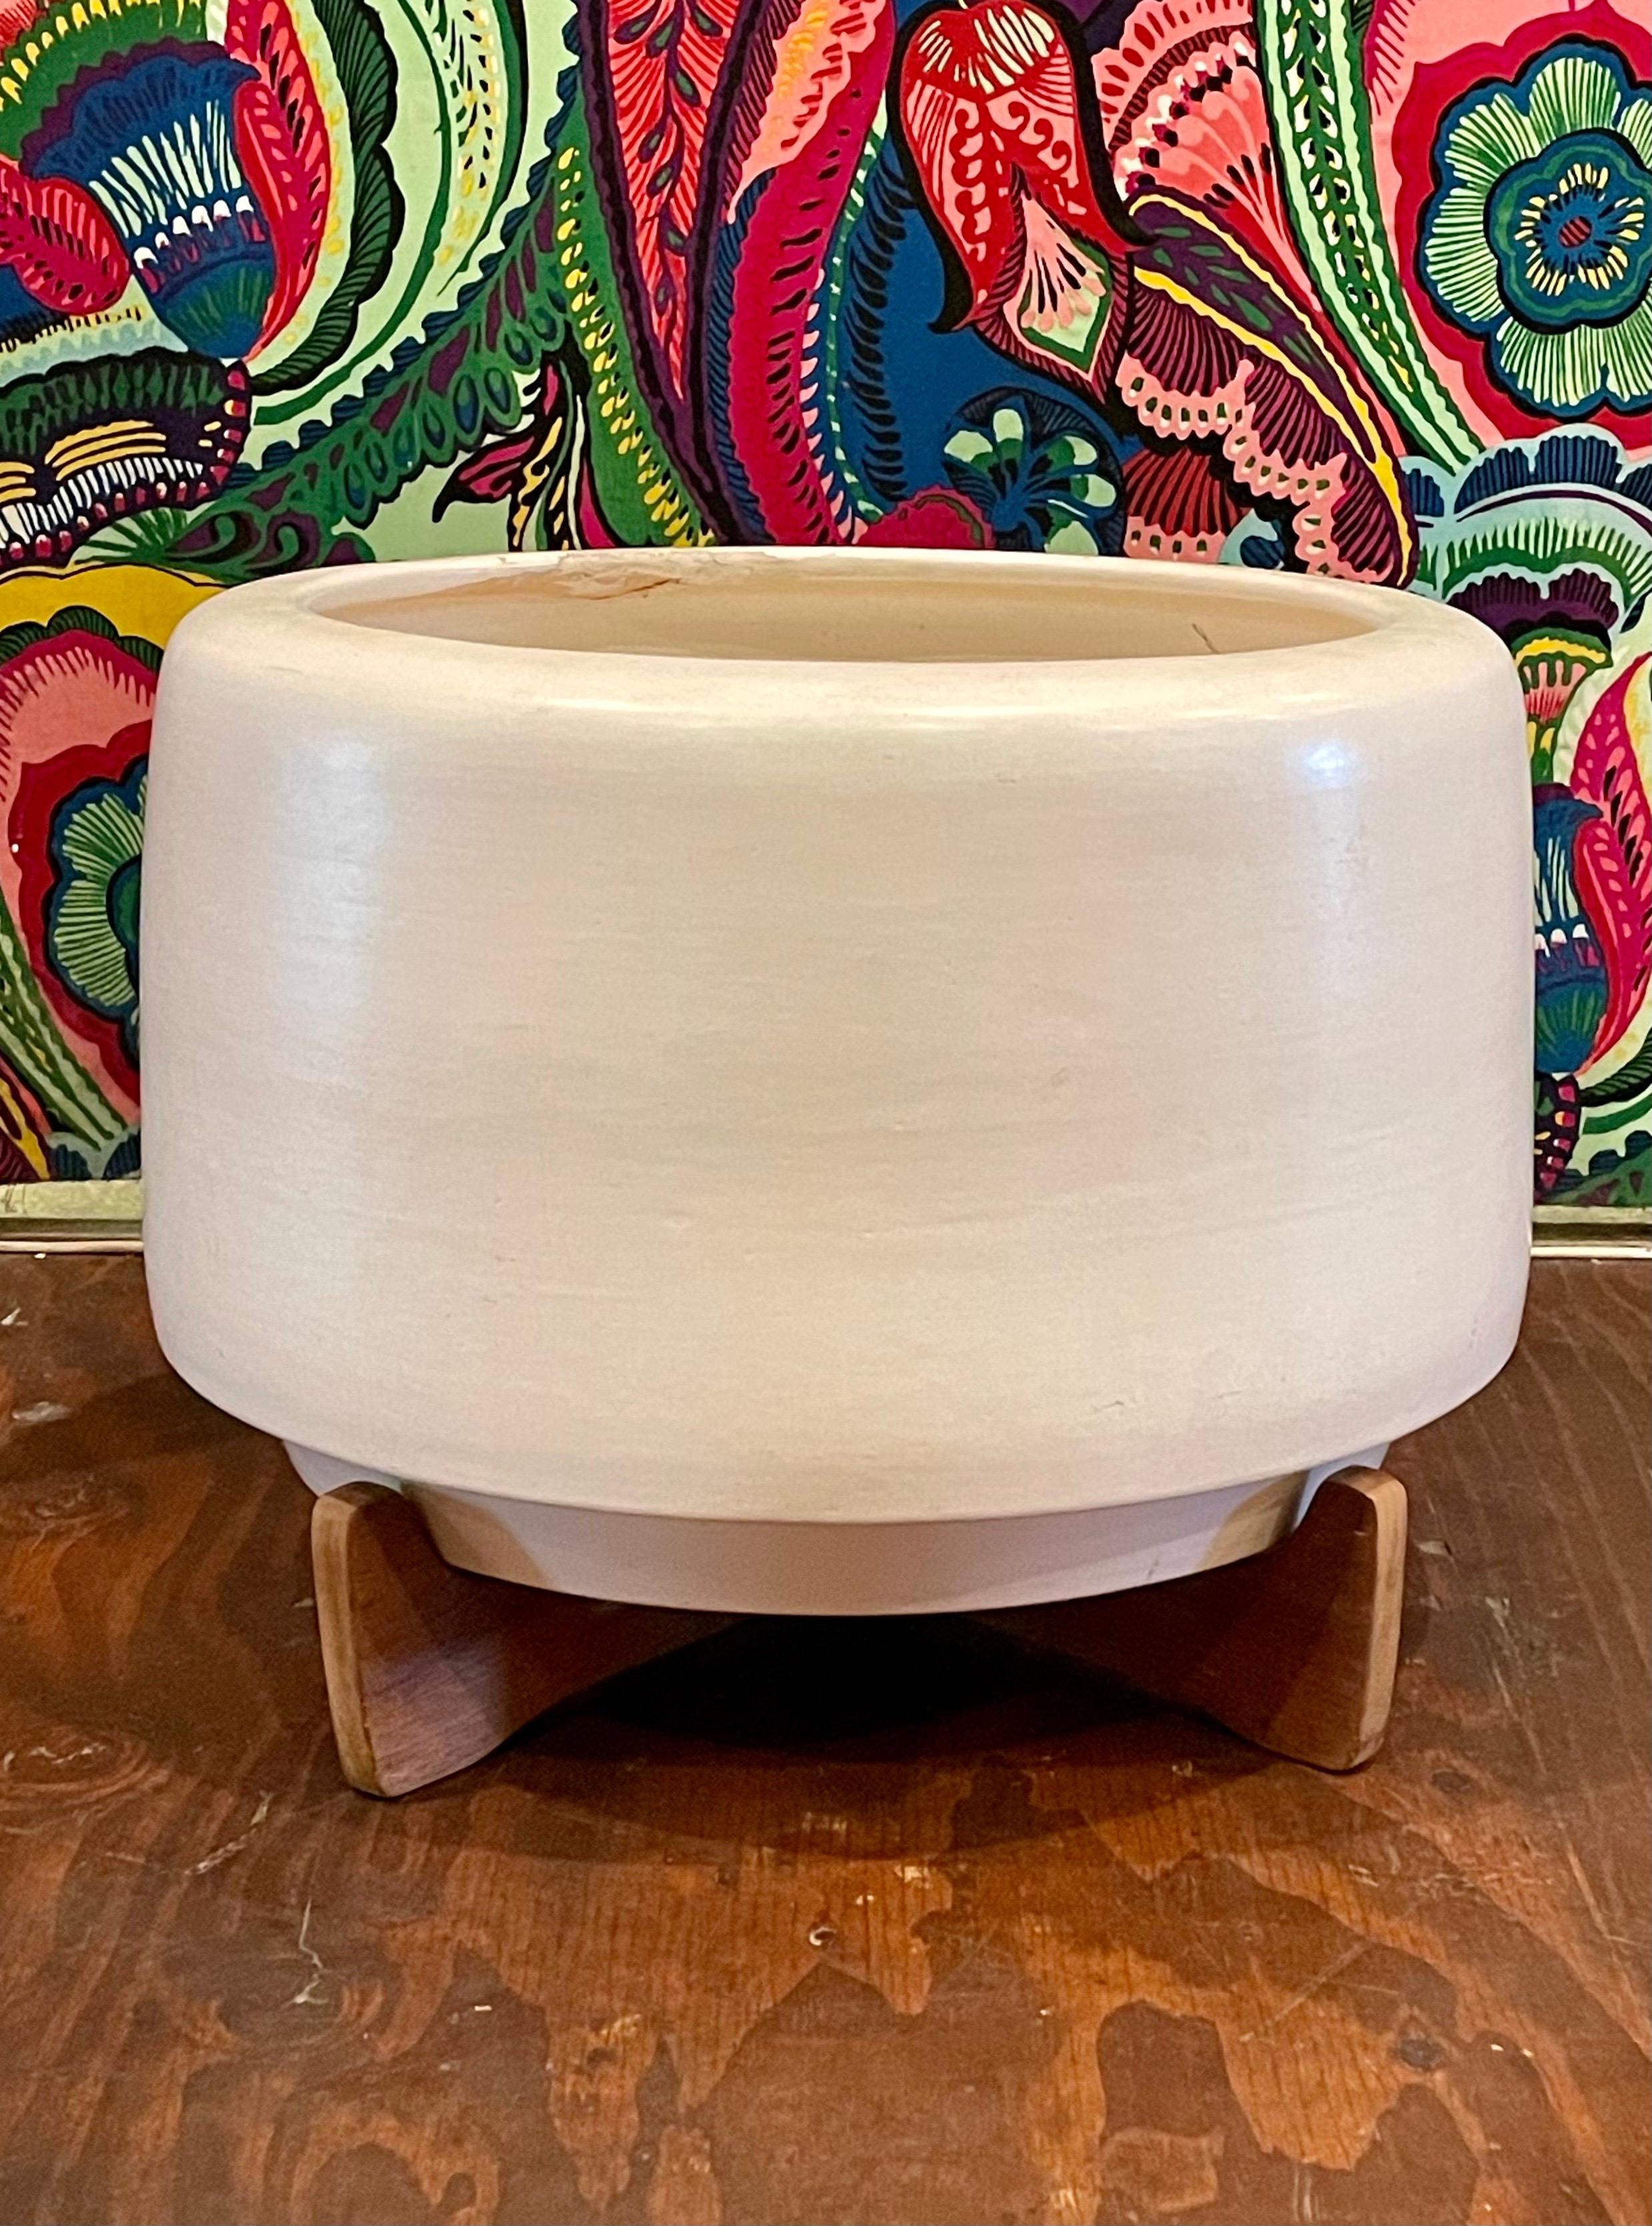 Period Architectural Pottery planter is commonly known as the “Tire”. This design is by Rex Goode and John Follis. Planter is in good shape has a chip on the edge top rim as shown, and retains the California redwood stand. Signed with the AP